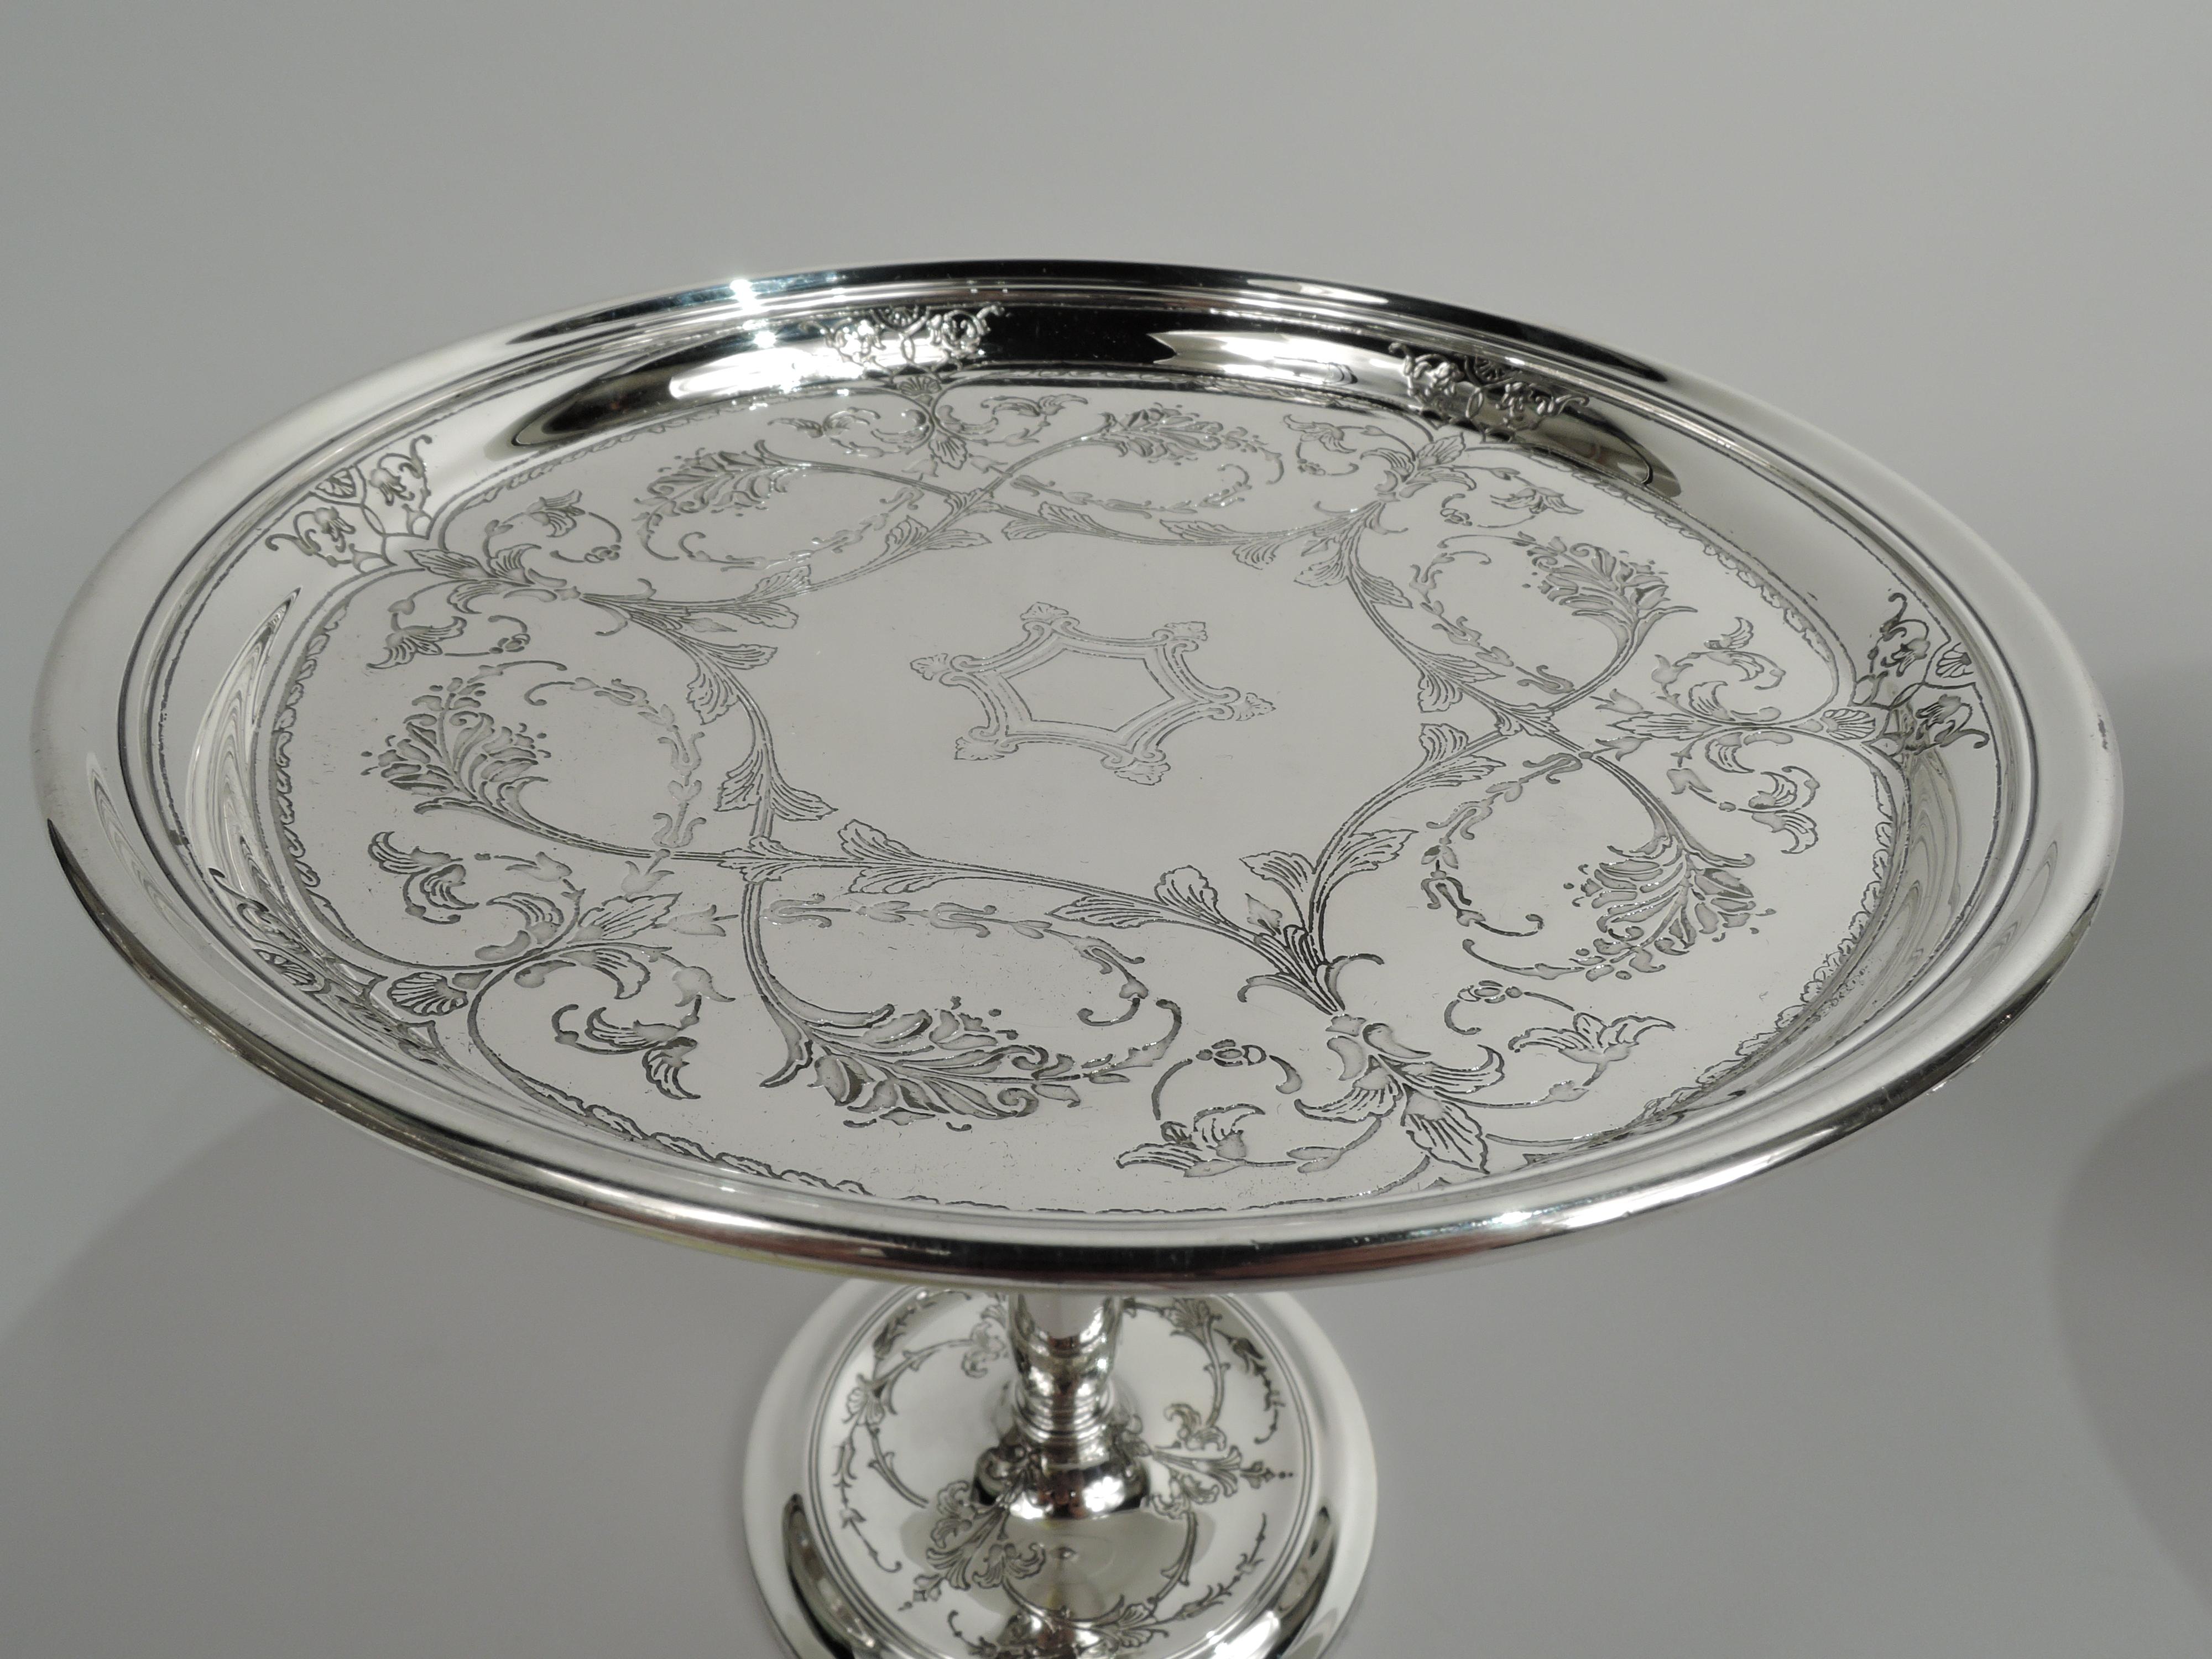 Pair of Tiffany Edwardian Classical sterling silver compotes. Made by Tiffany & Co. in New York, ca 1920. Each: Round and shallow bowl on upward tapering stem mounted to found foot with concave center. Entwined leafing scrollwork on well and foot.